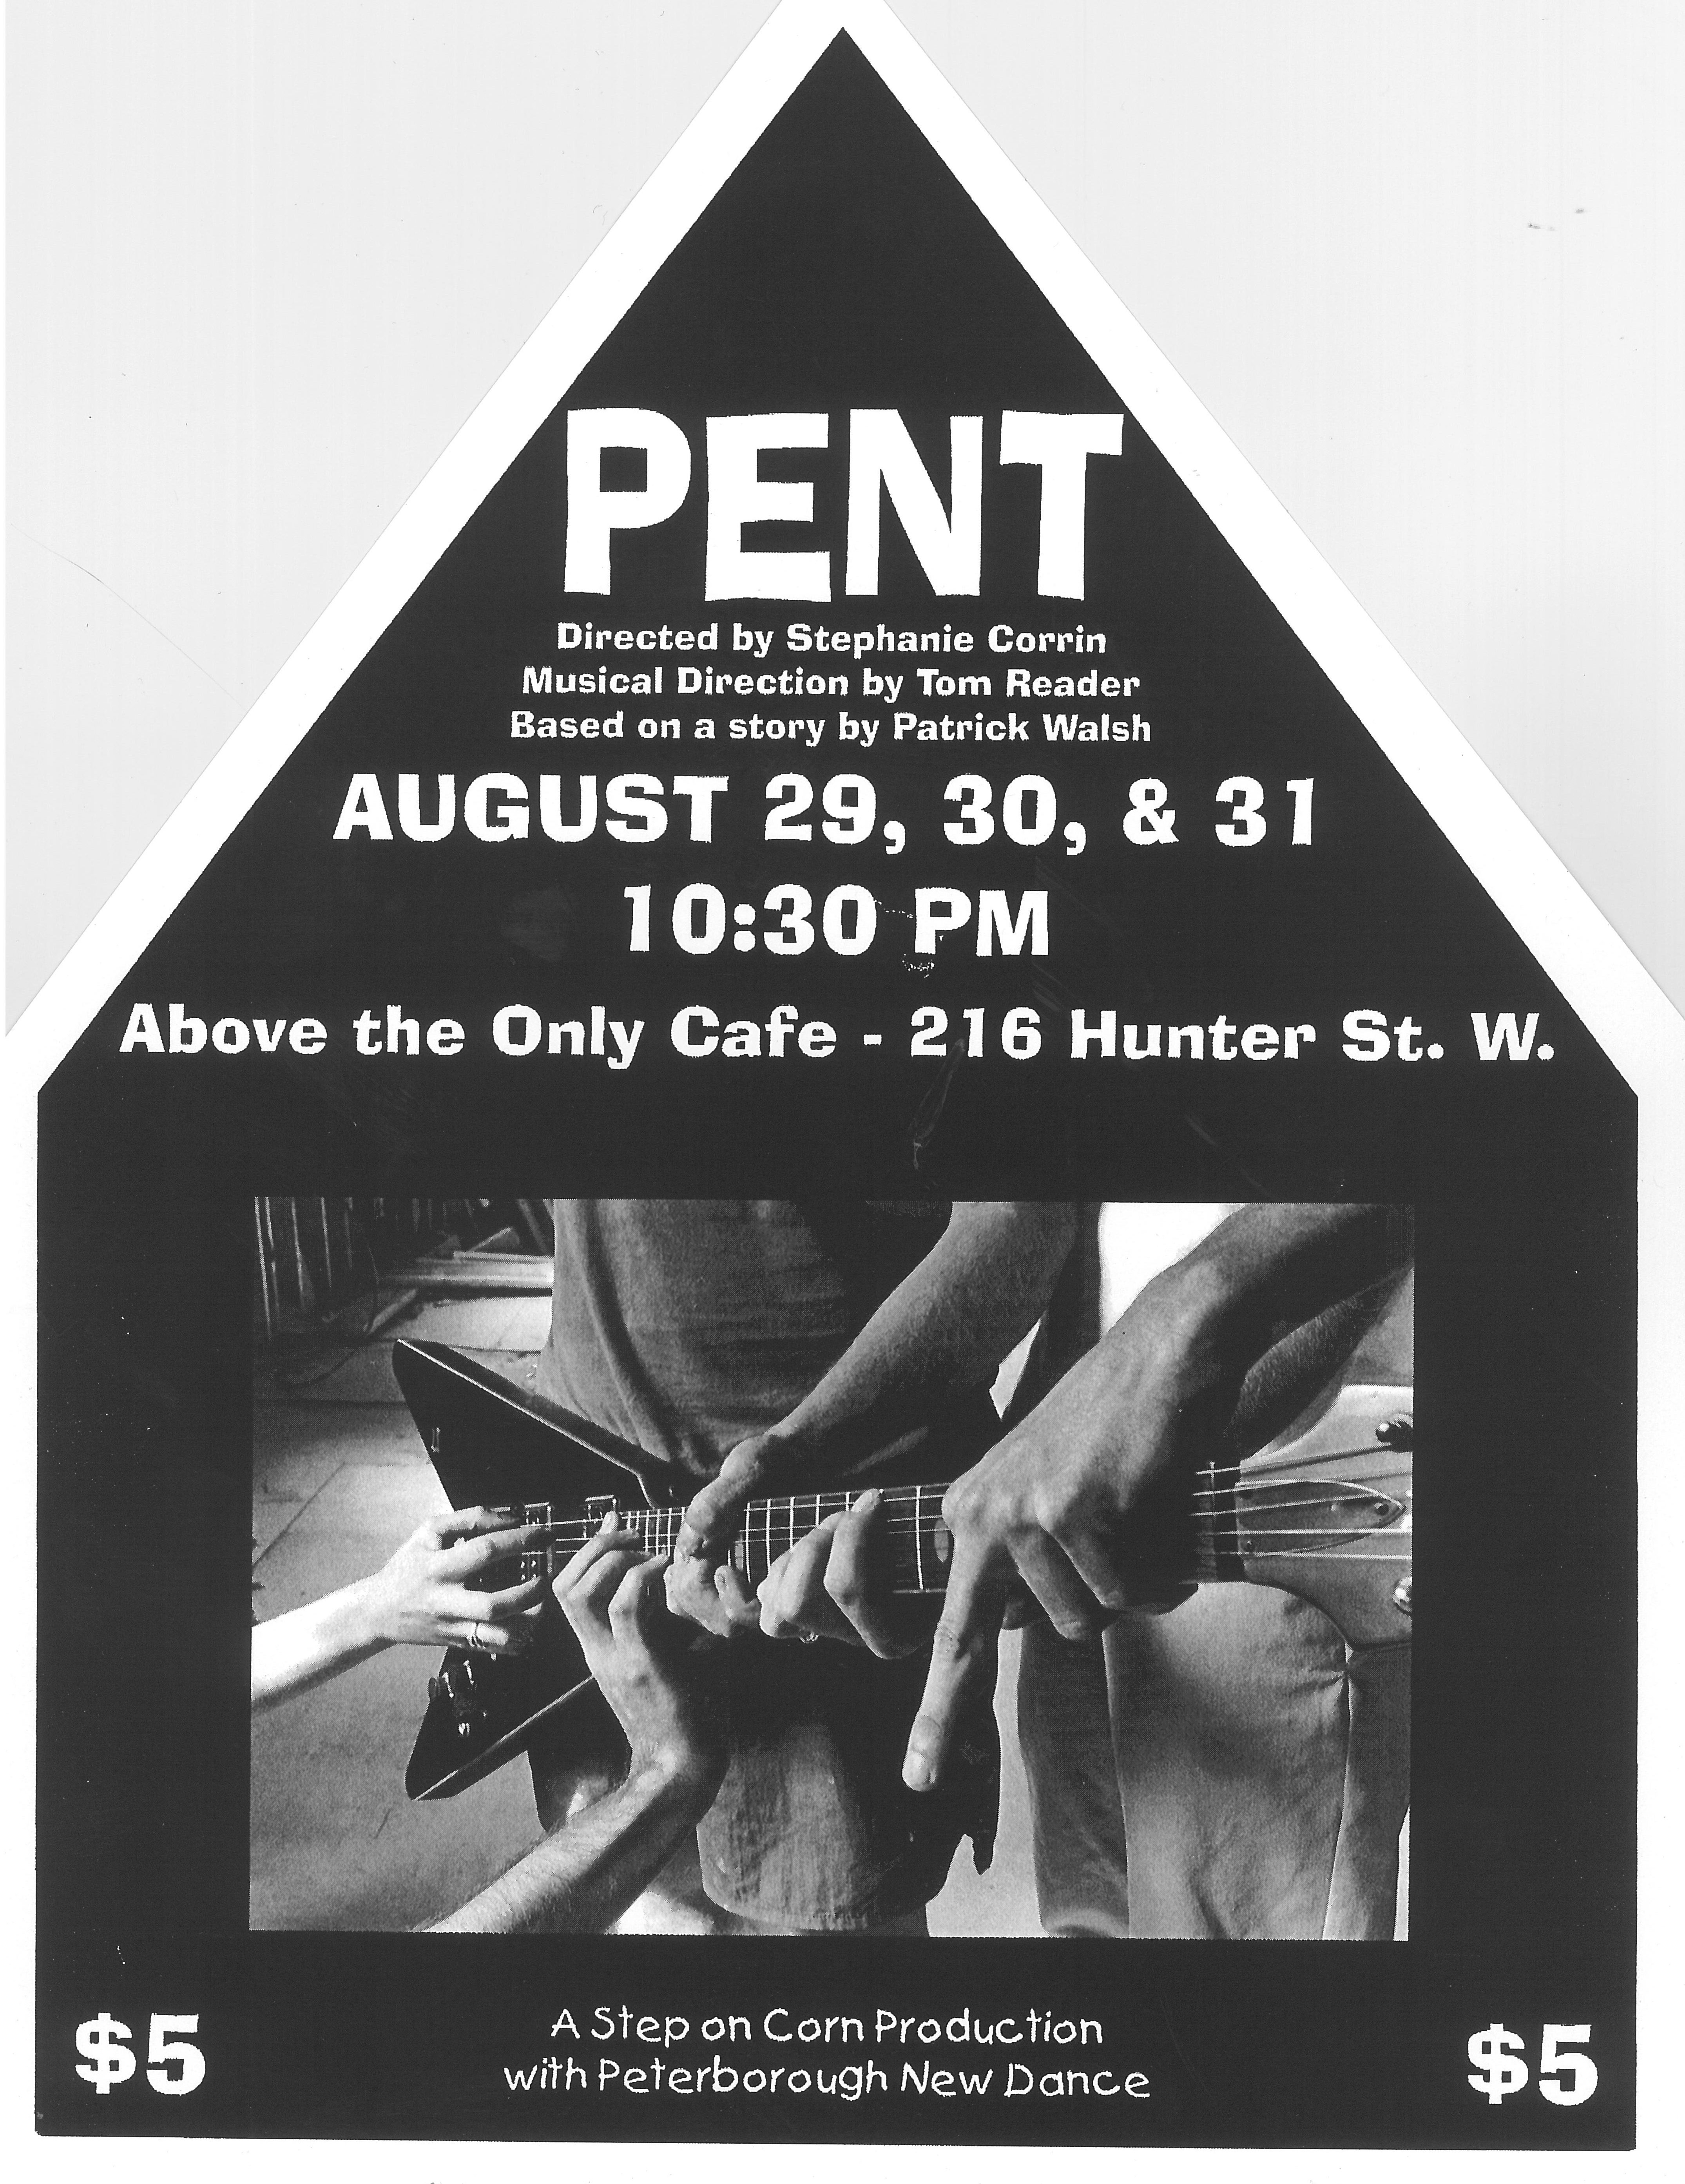 Step On Corn Productions – Pent Poster advertising:PENT in the photo.